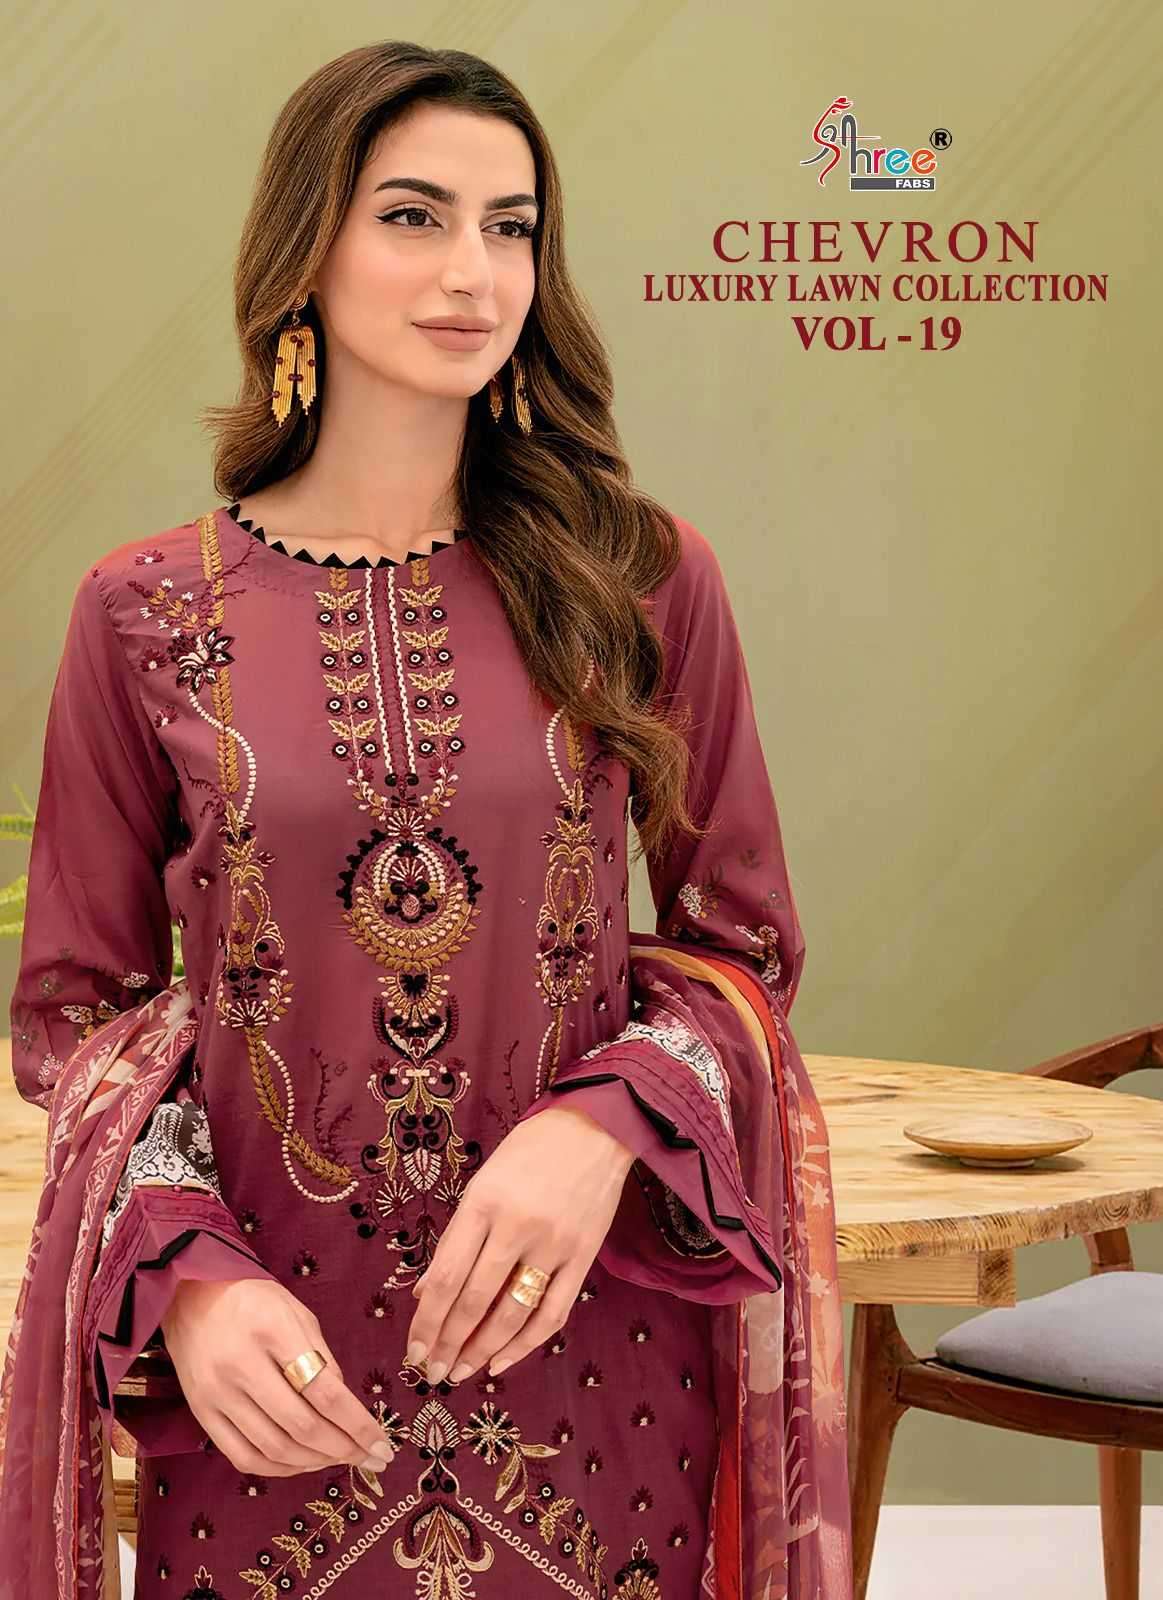 Shree Fabs Chevron Luxury Lawn Collection vol 19 Cotton with...